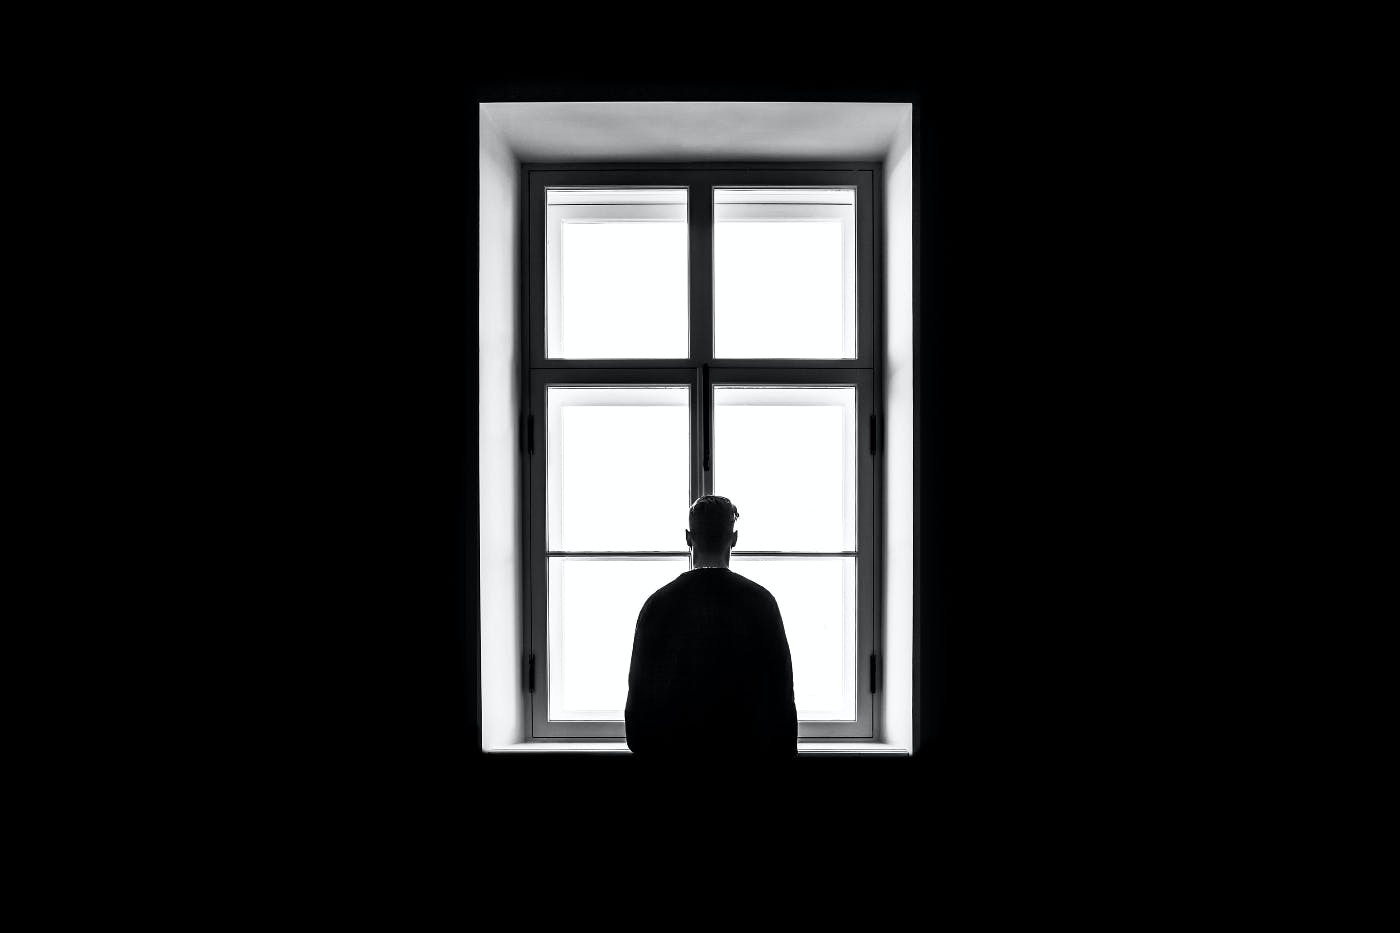 A man in a dark room standing looking out a window